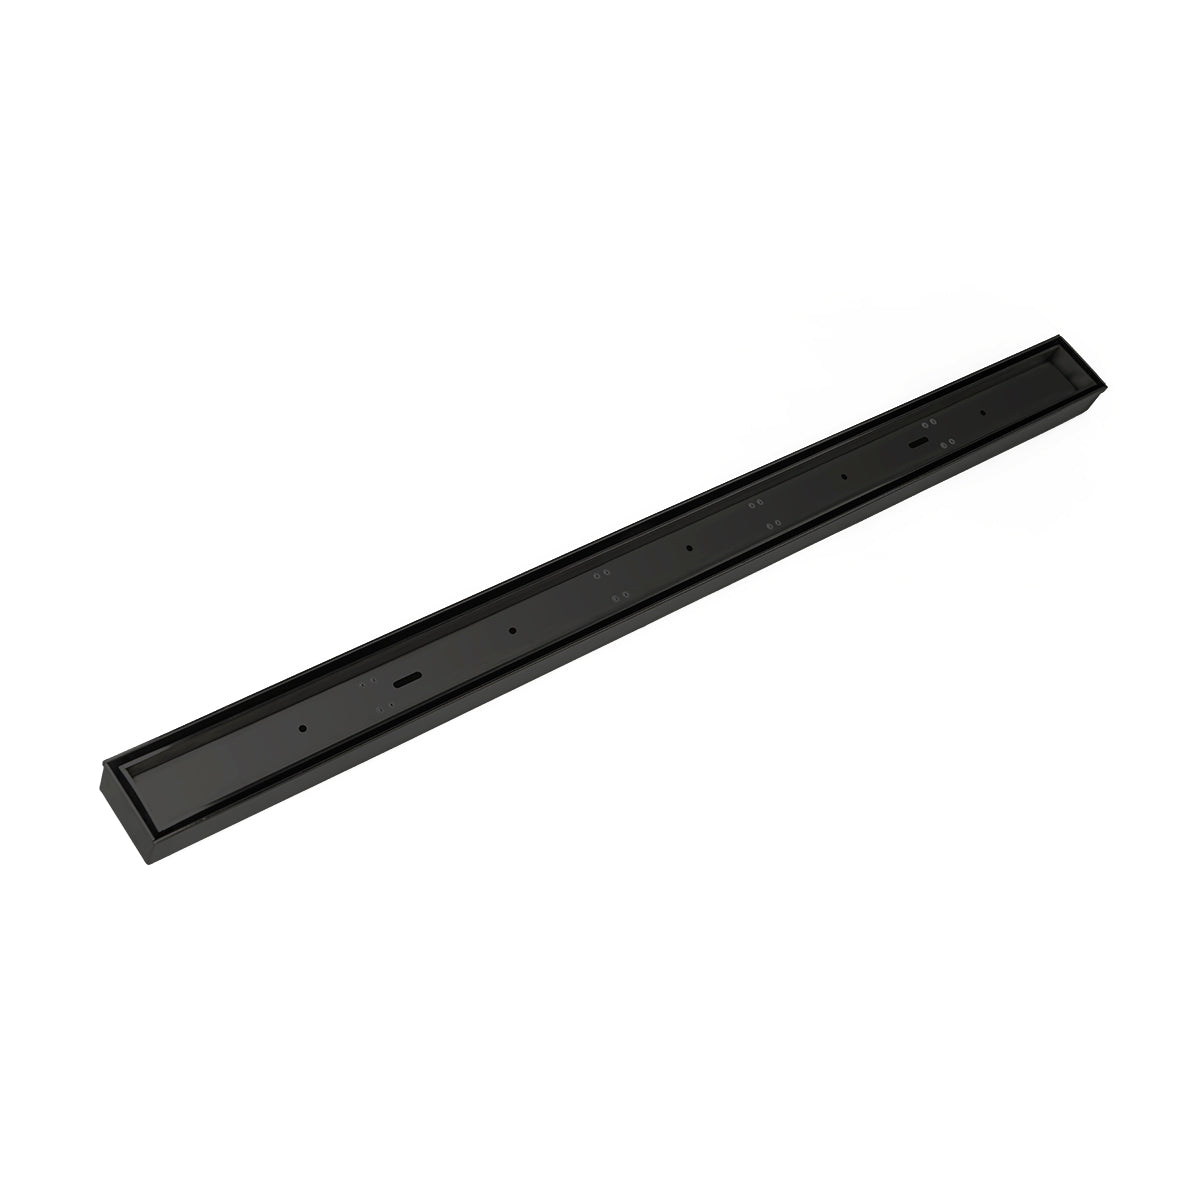 Infinity Drain 48" FX Low Profile Series Fixed Length Linear Drain Kit with Tile Insert Frame